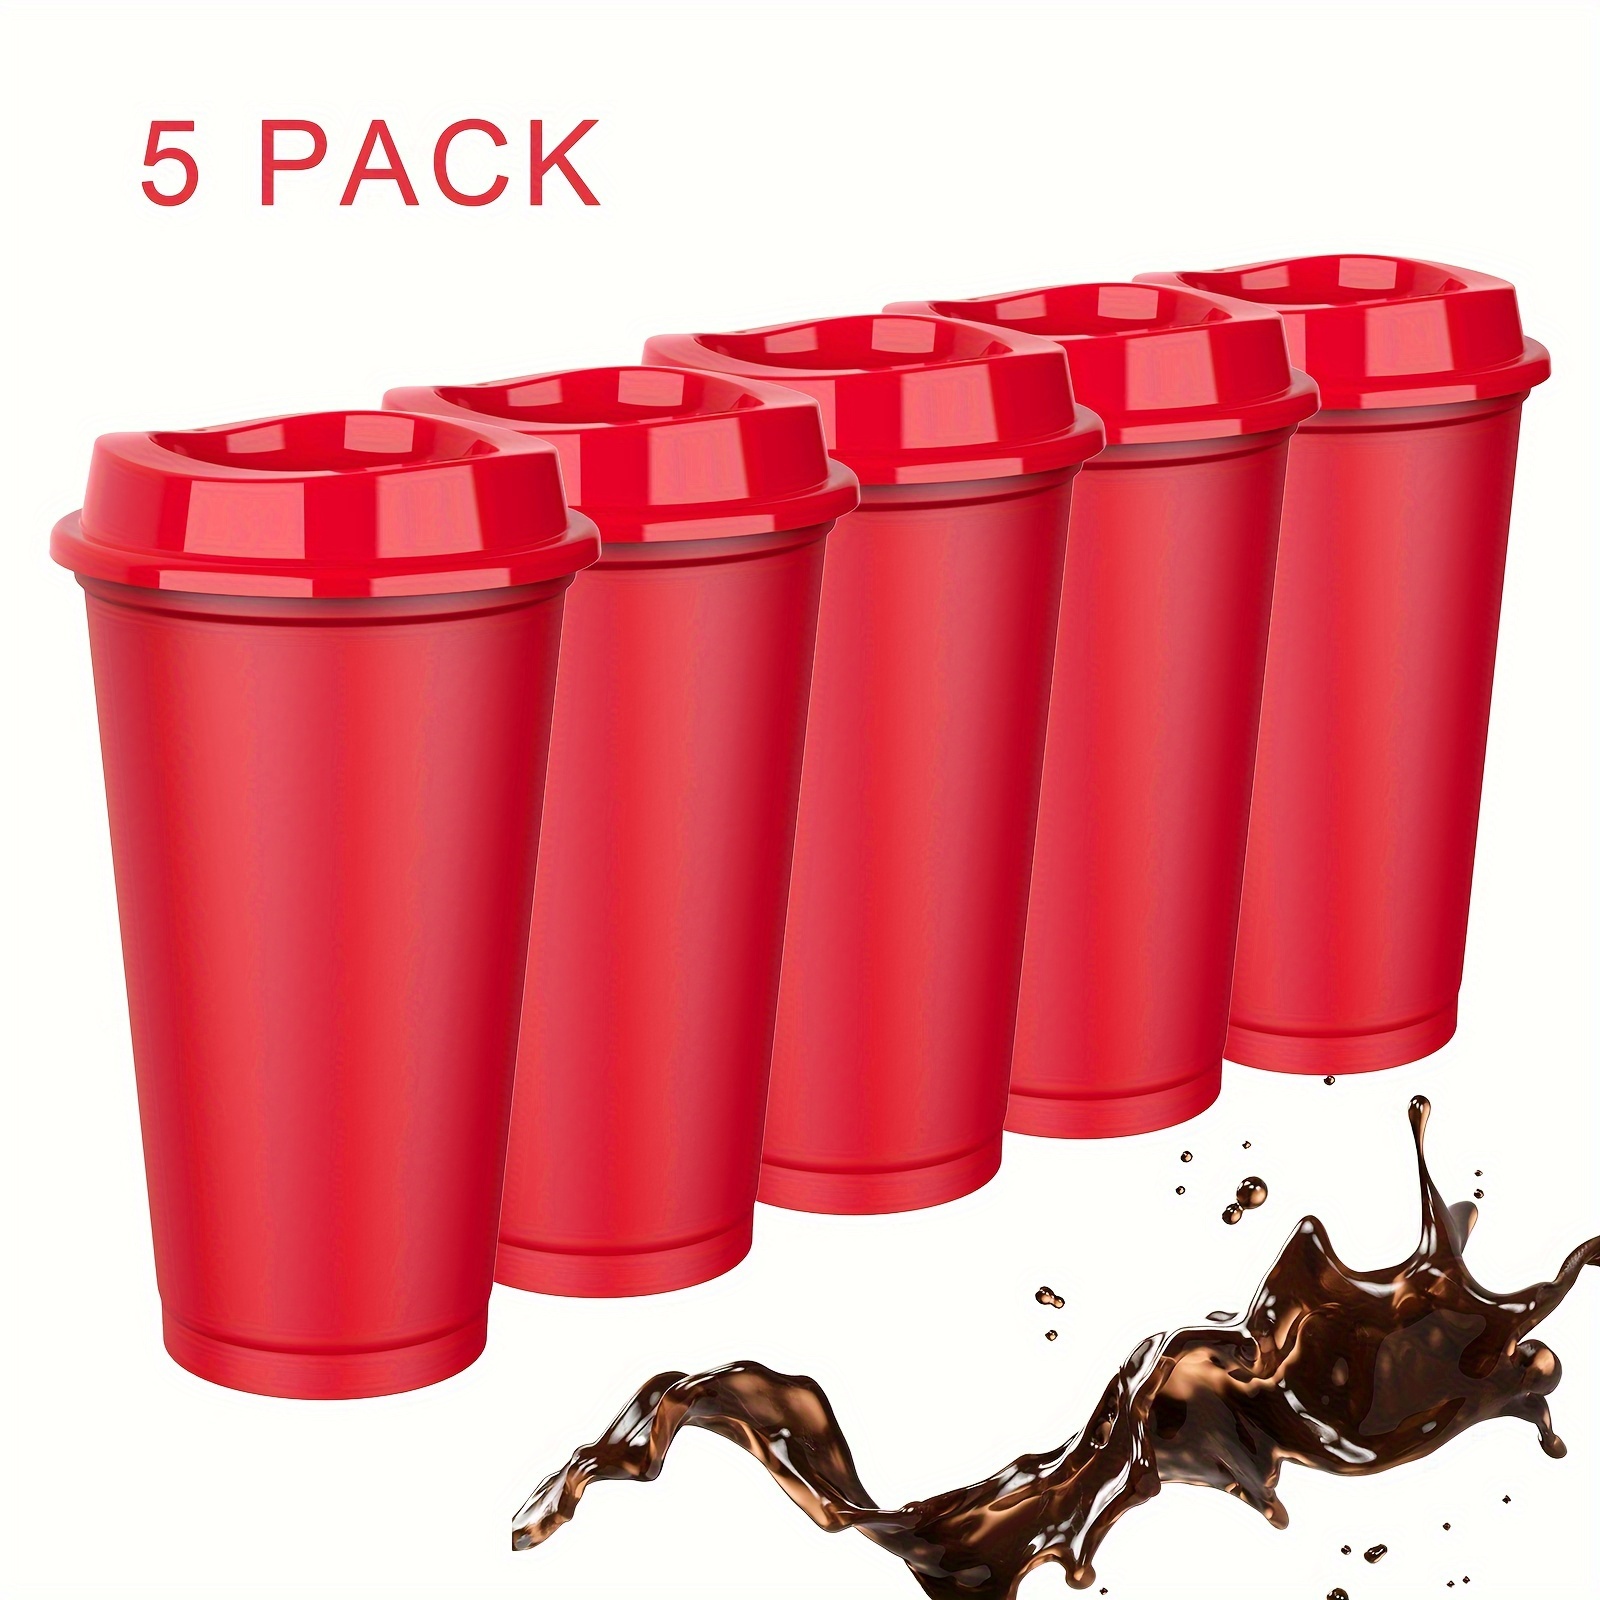 

5/6pcs, Reusable Coffee Cups With Lids, Reusable Hot Drink Cups Bulk, 16 Oz Plastic Tumblers Cup With Lids For Hot Drink, Travel Coffee Mug With Lid, To Go Coffee Cups For Hot And Cold Drinks